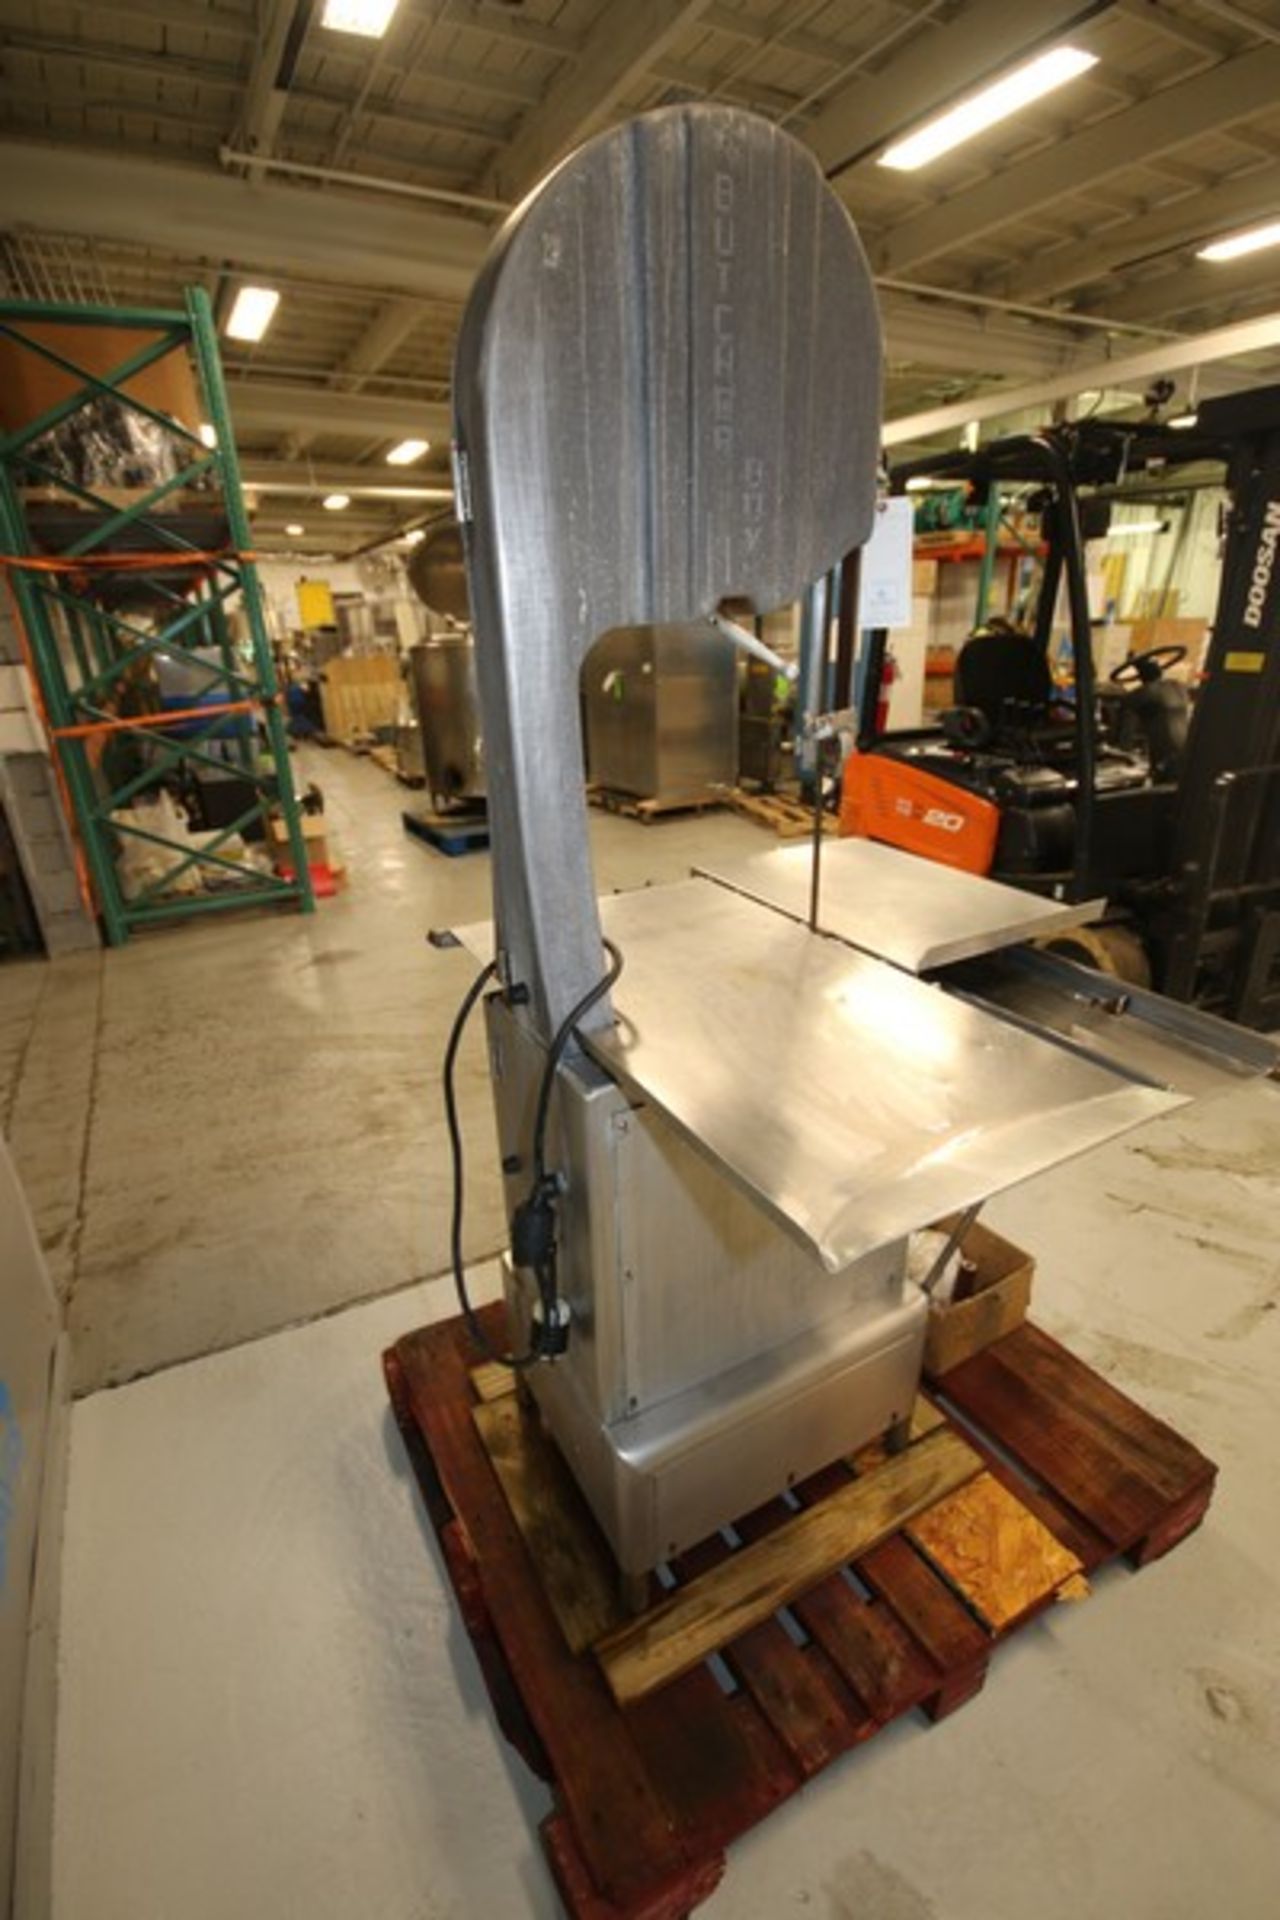 Butcher Boy S/S Vertical Meat Saw, M/N B16-F, S/N 6-22053, 203 Volts, 3 Phase, with Aprox. 36" L x - Image 7 of 9